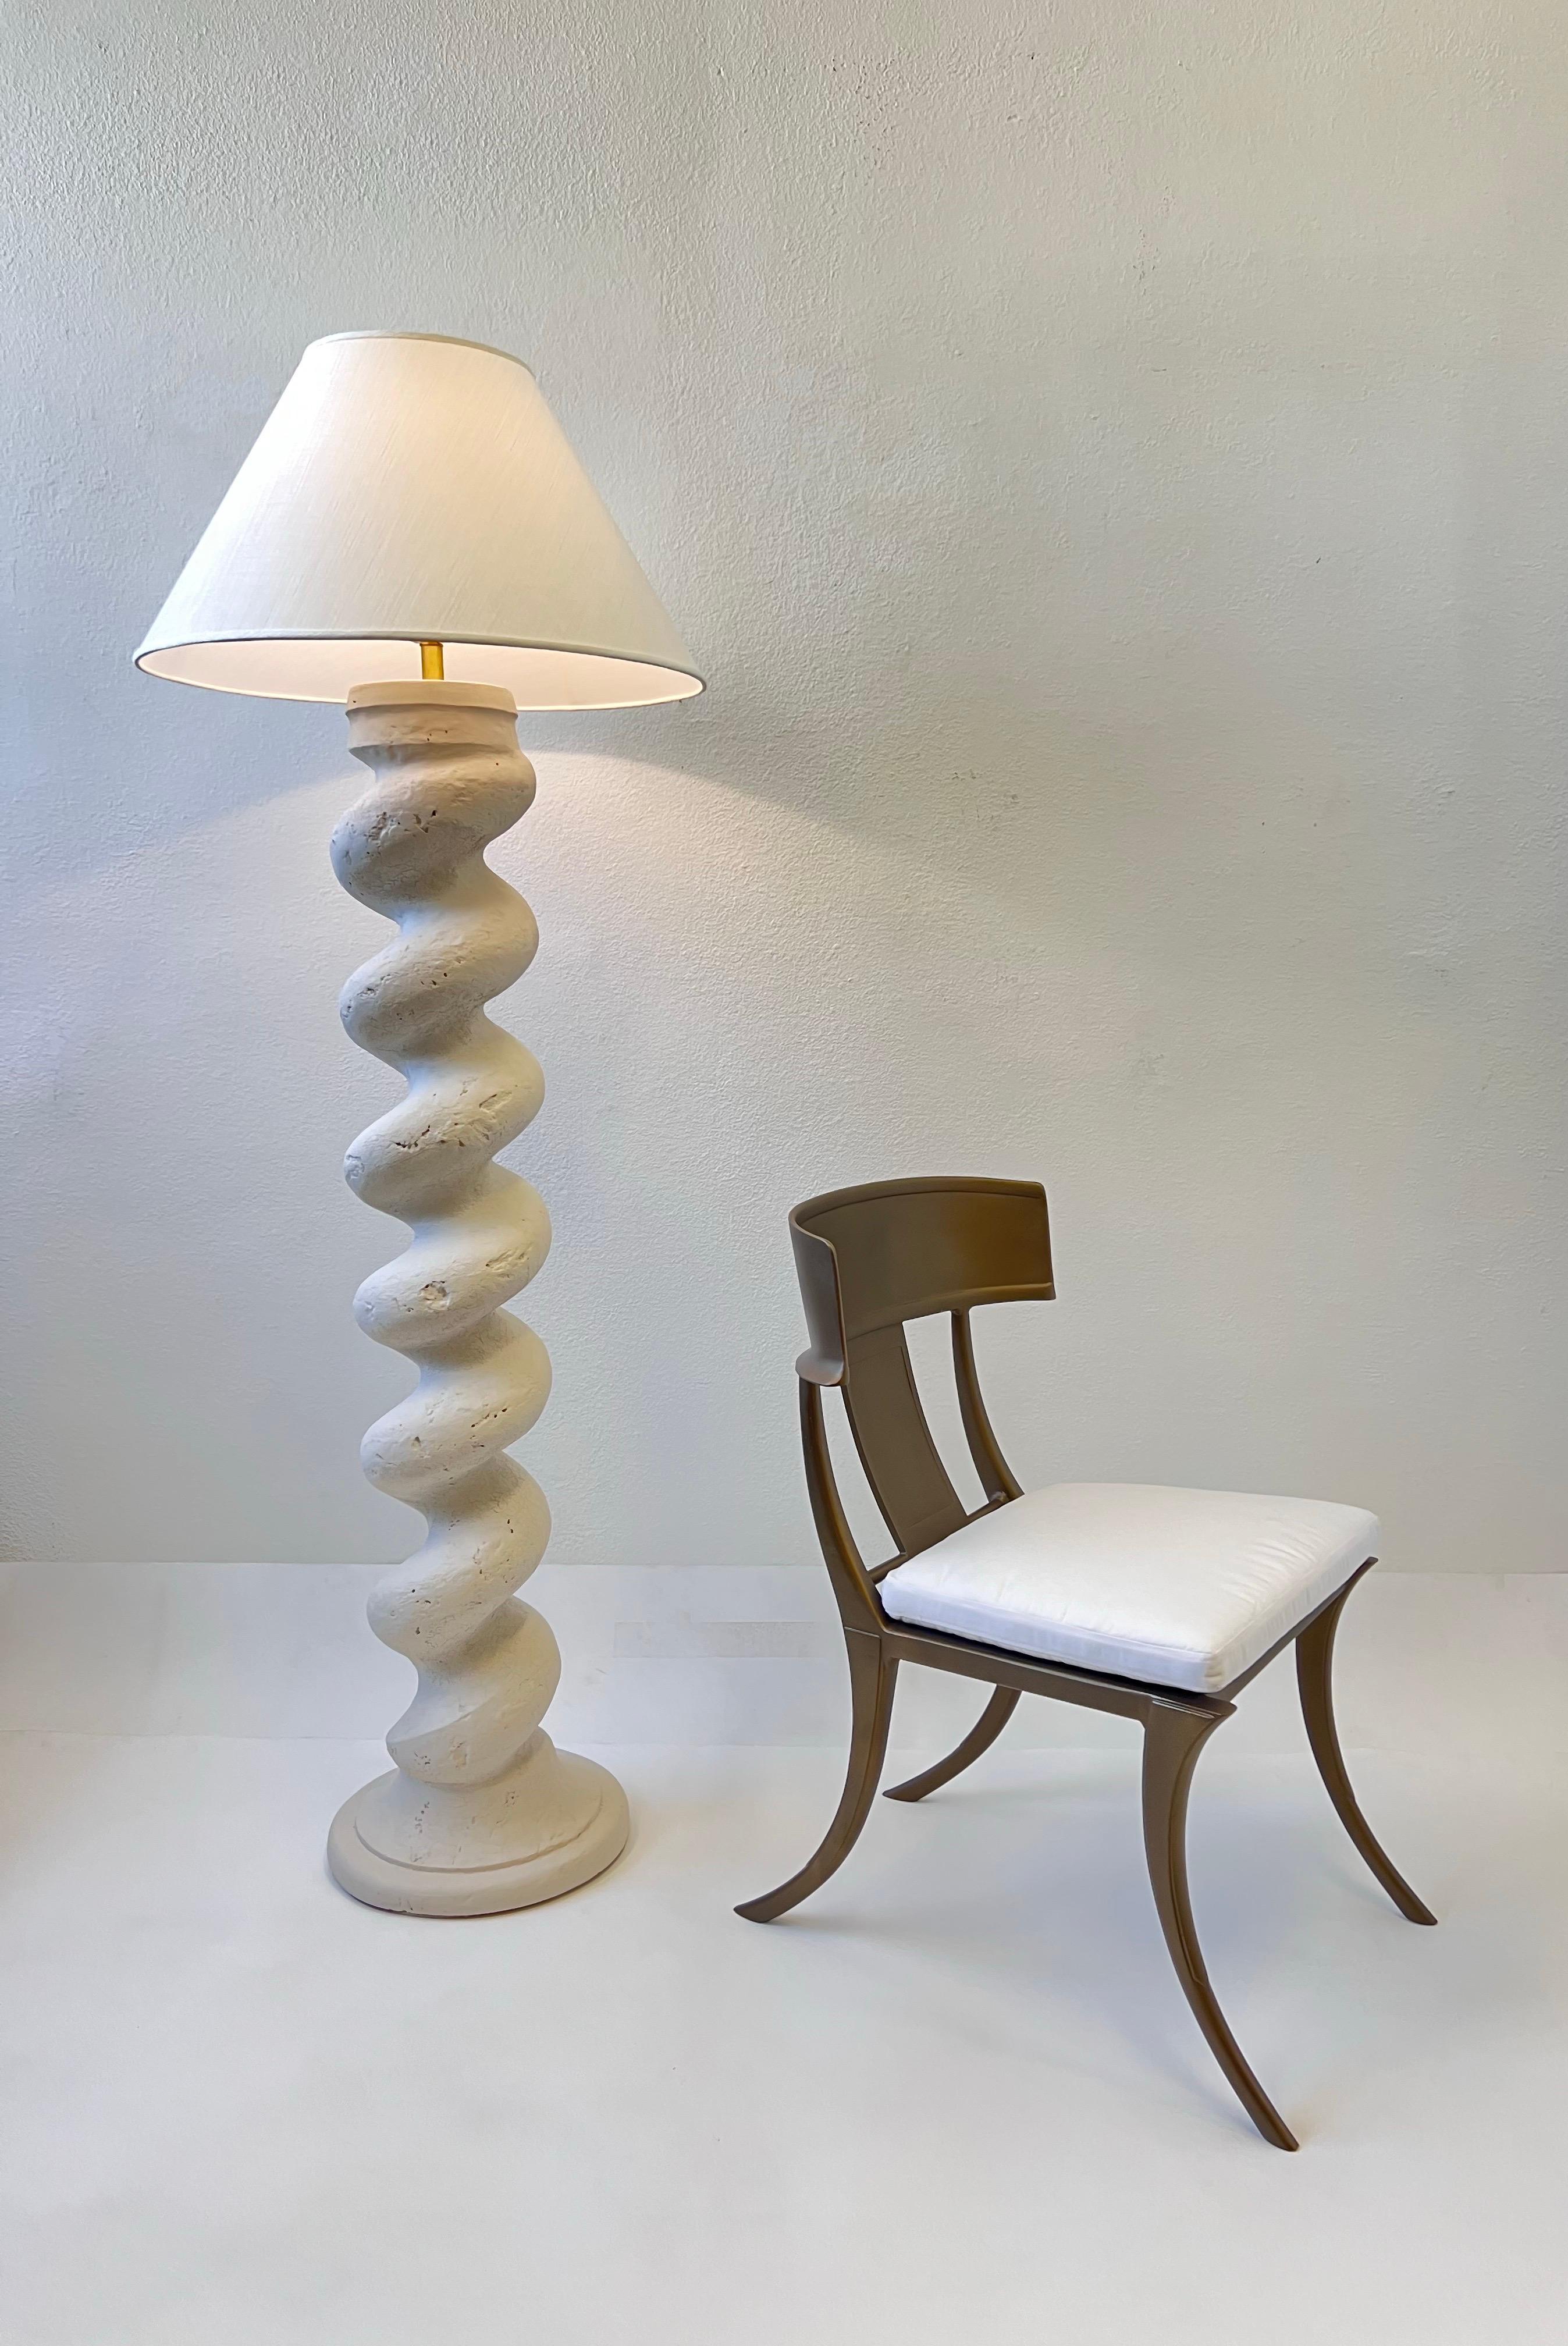 Pair of Off White Spiral Form Plaster and Brass Floor Lamps by Michael Taylor  1